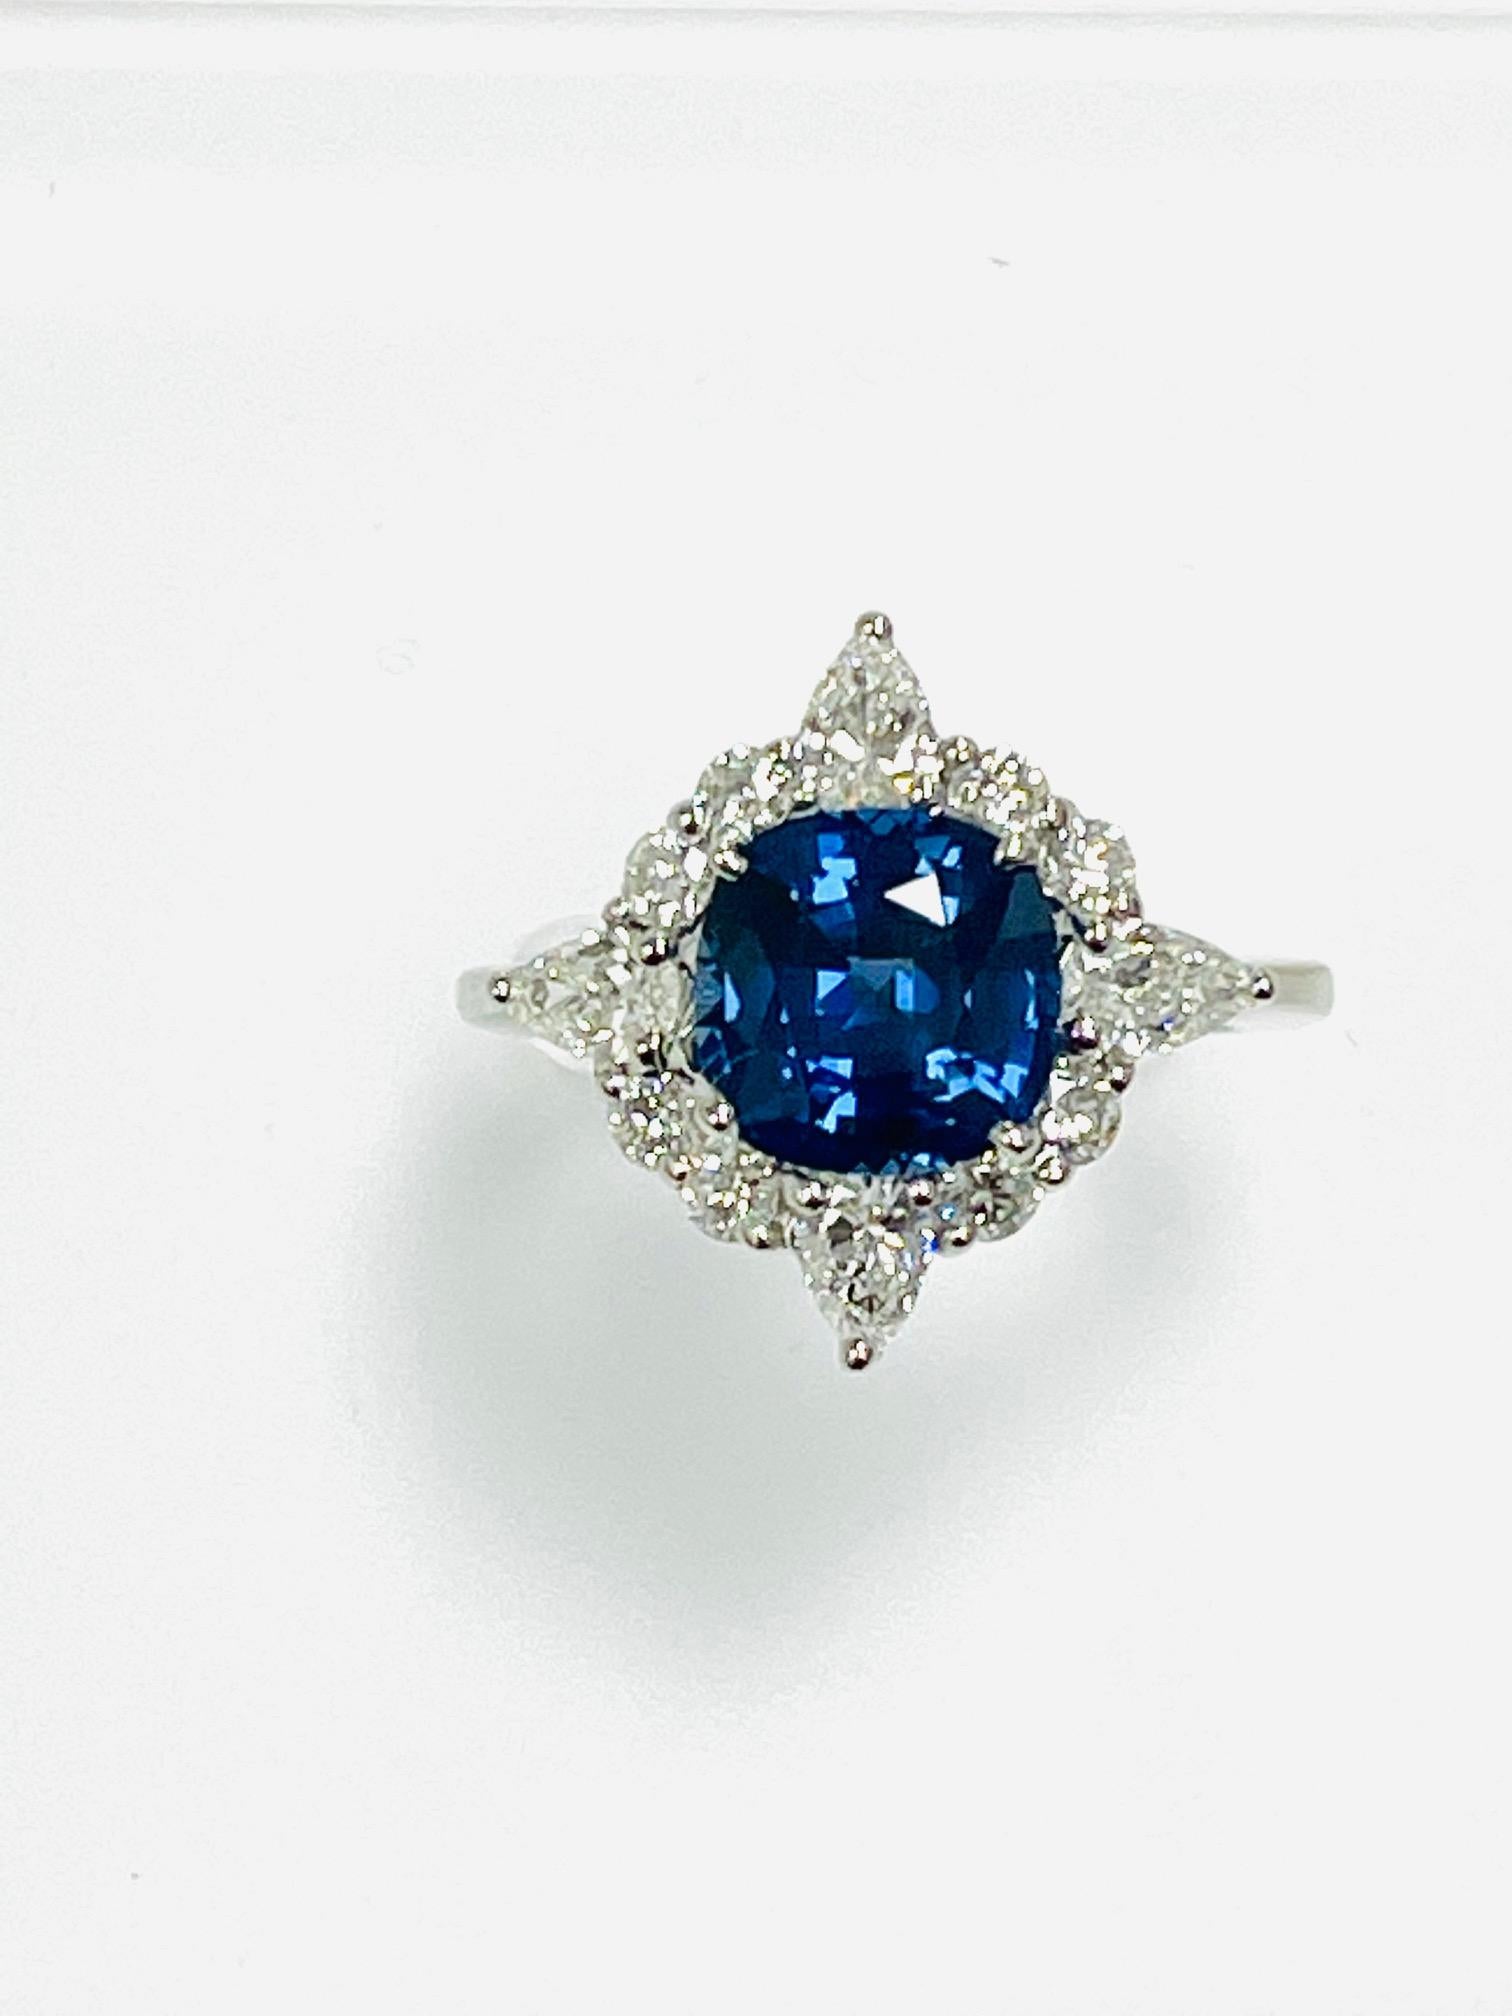 3.92 Carat Cushion cut Sapphire, heat , certified CDc lab, set in platinum ring along with 1.50 ct round and pear shape diamond.